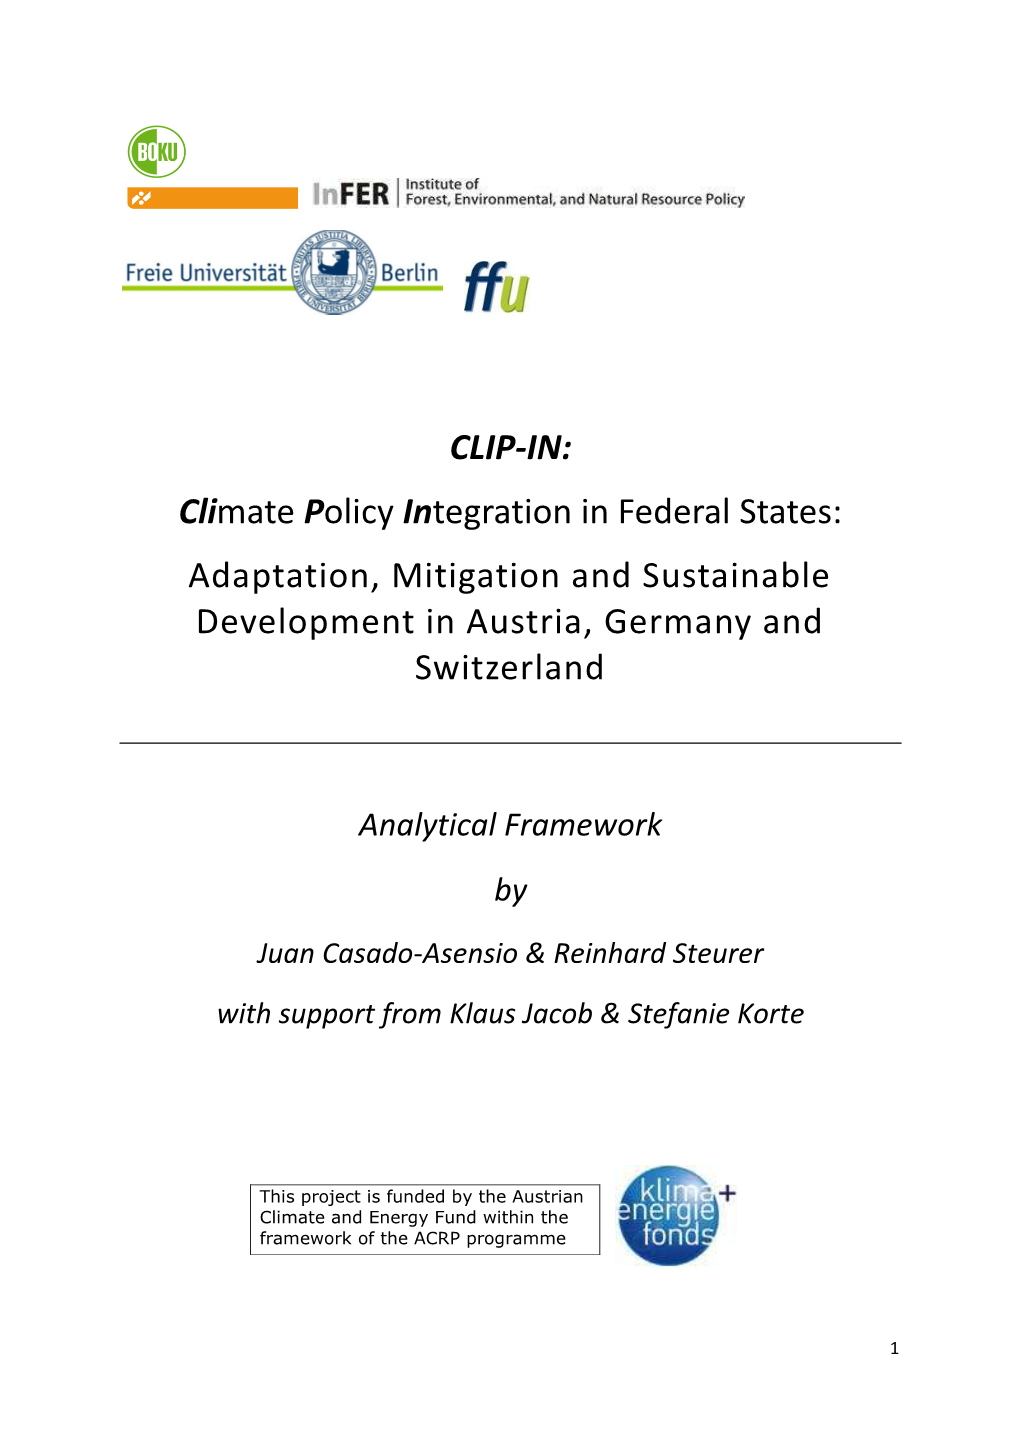 CLIP-IN: Climate Policy Integration in Federal States: Adaptation, Mitigation and Sustainable Development in Austria, Germany and Switzerland